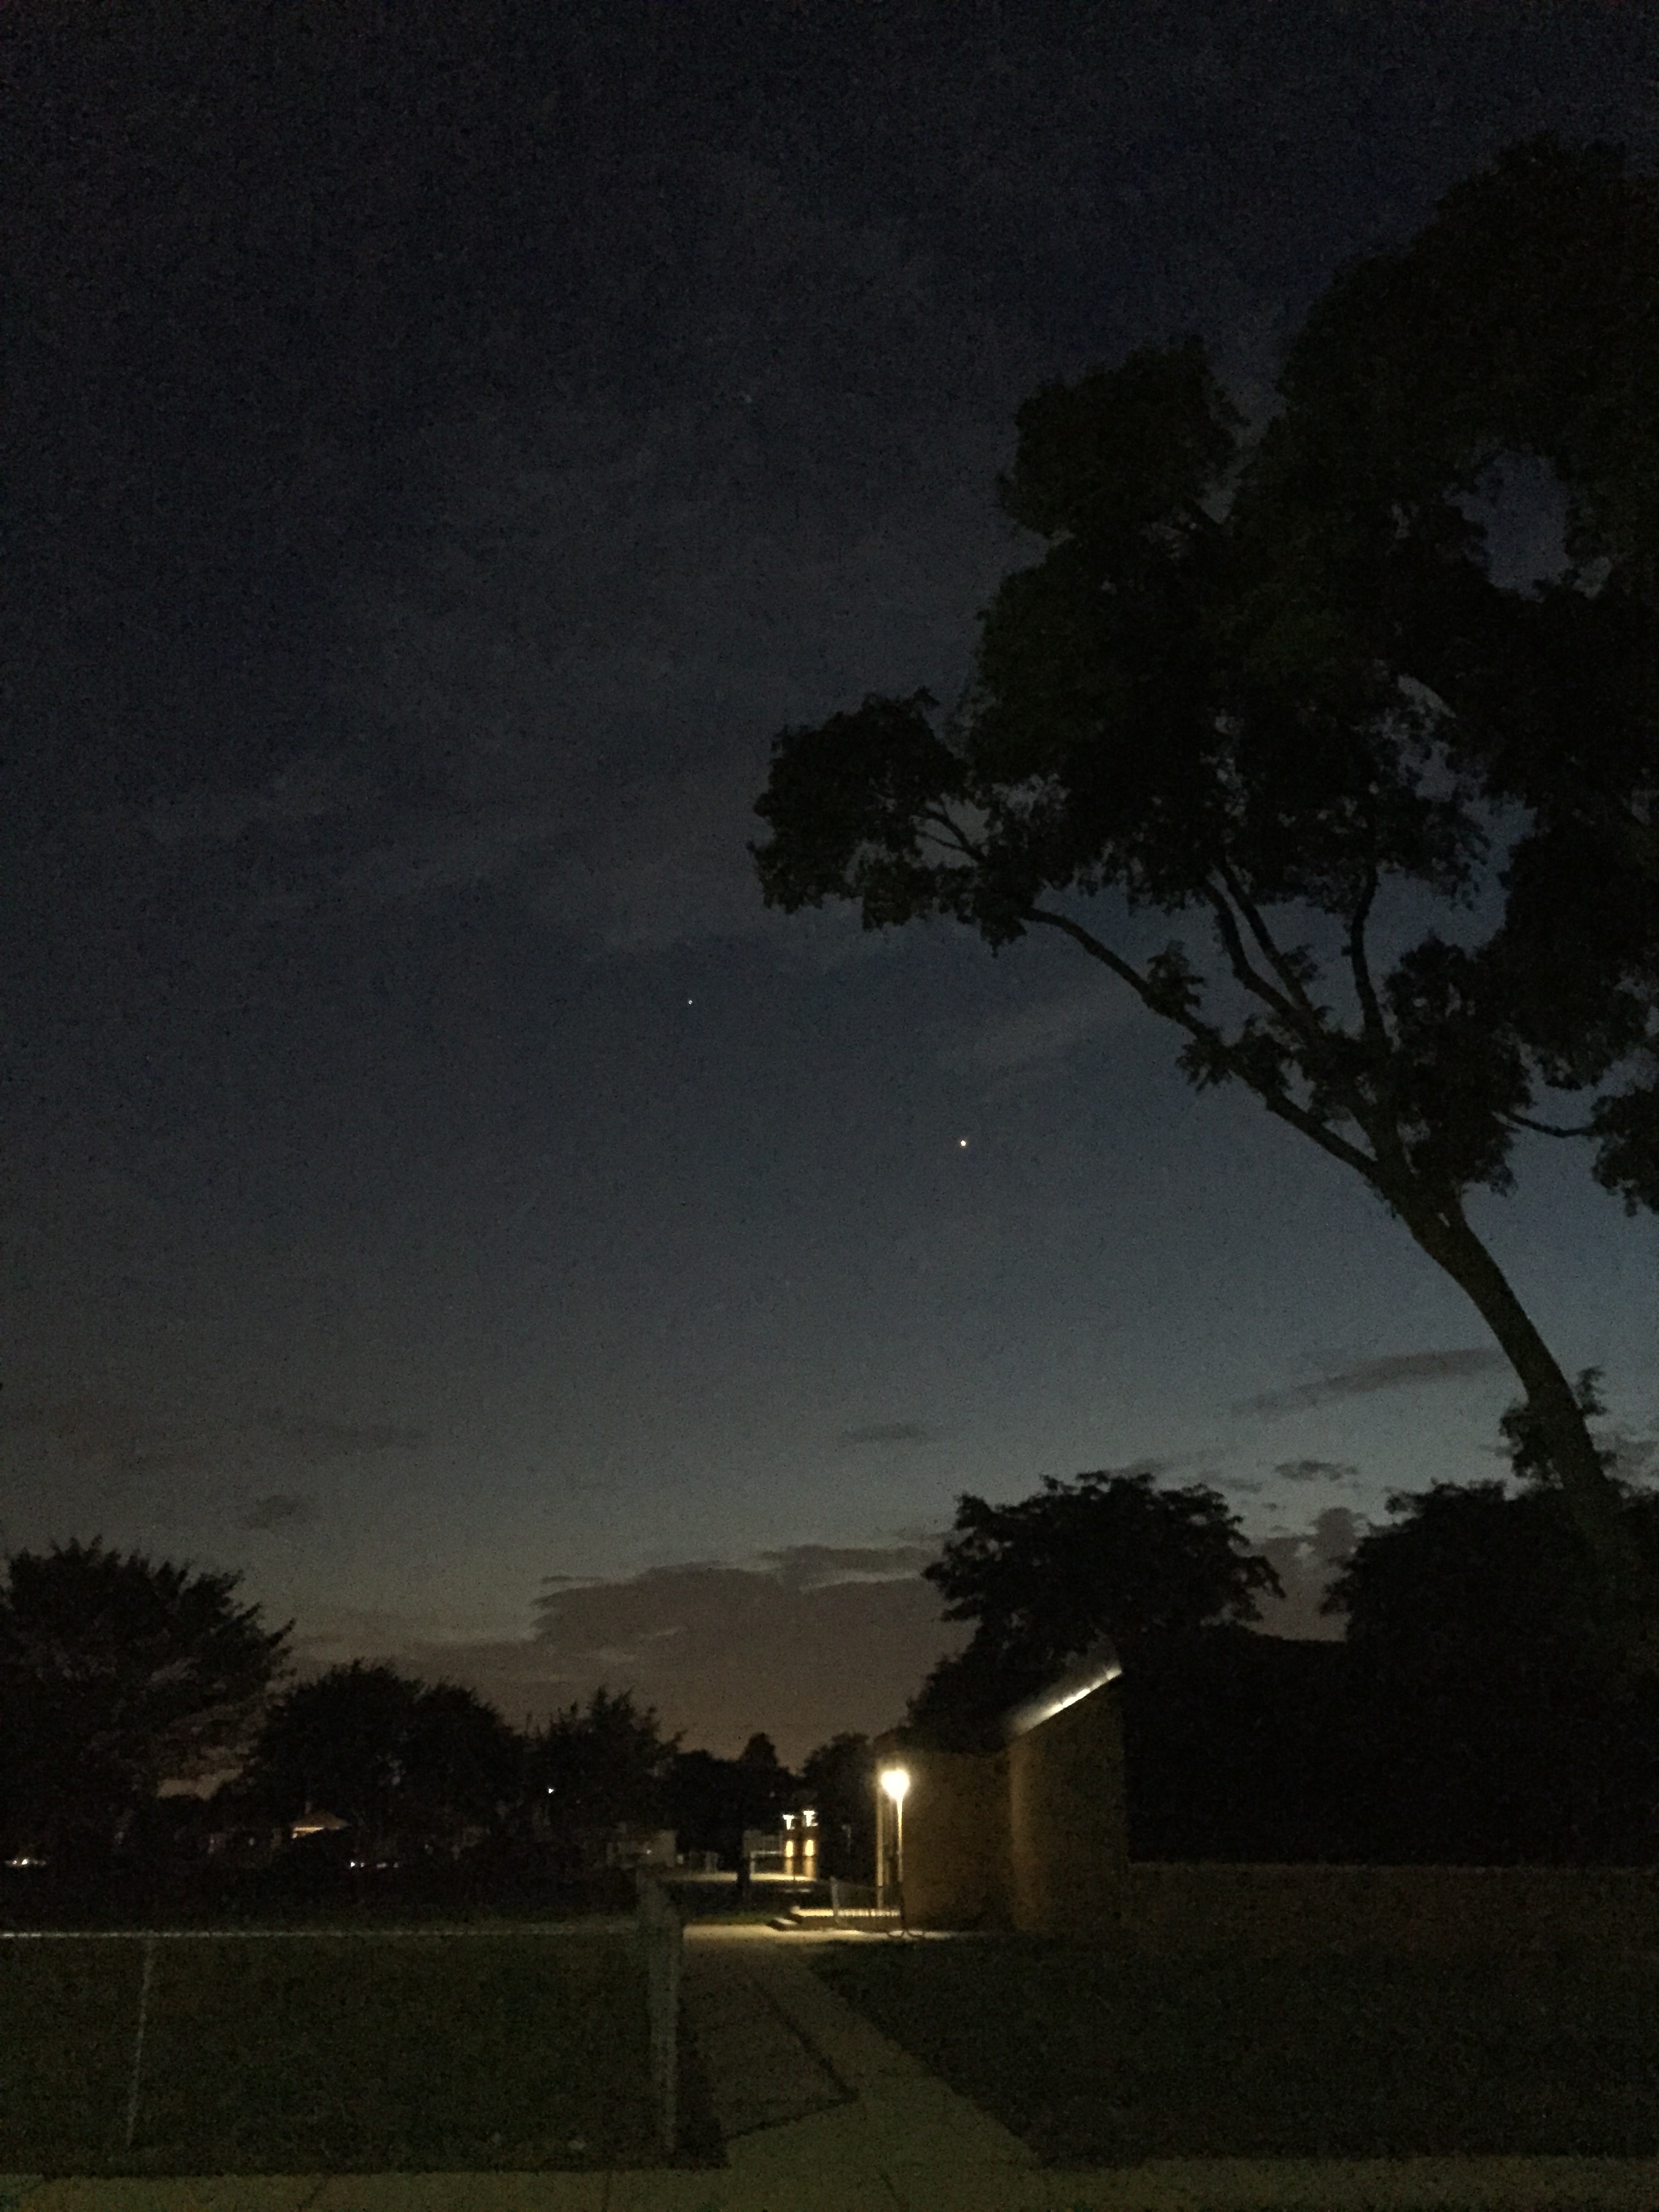 L) Jupiter high in the sky - on the right is the planet Venus. (Credit/Evan Jankens)